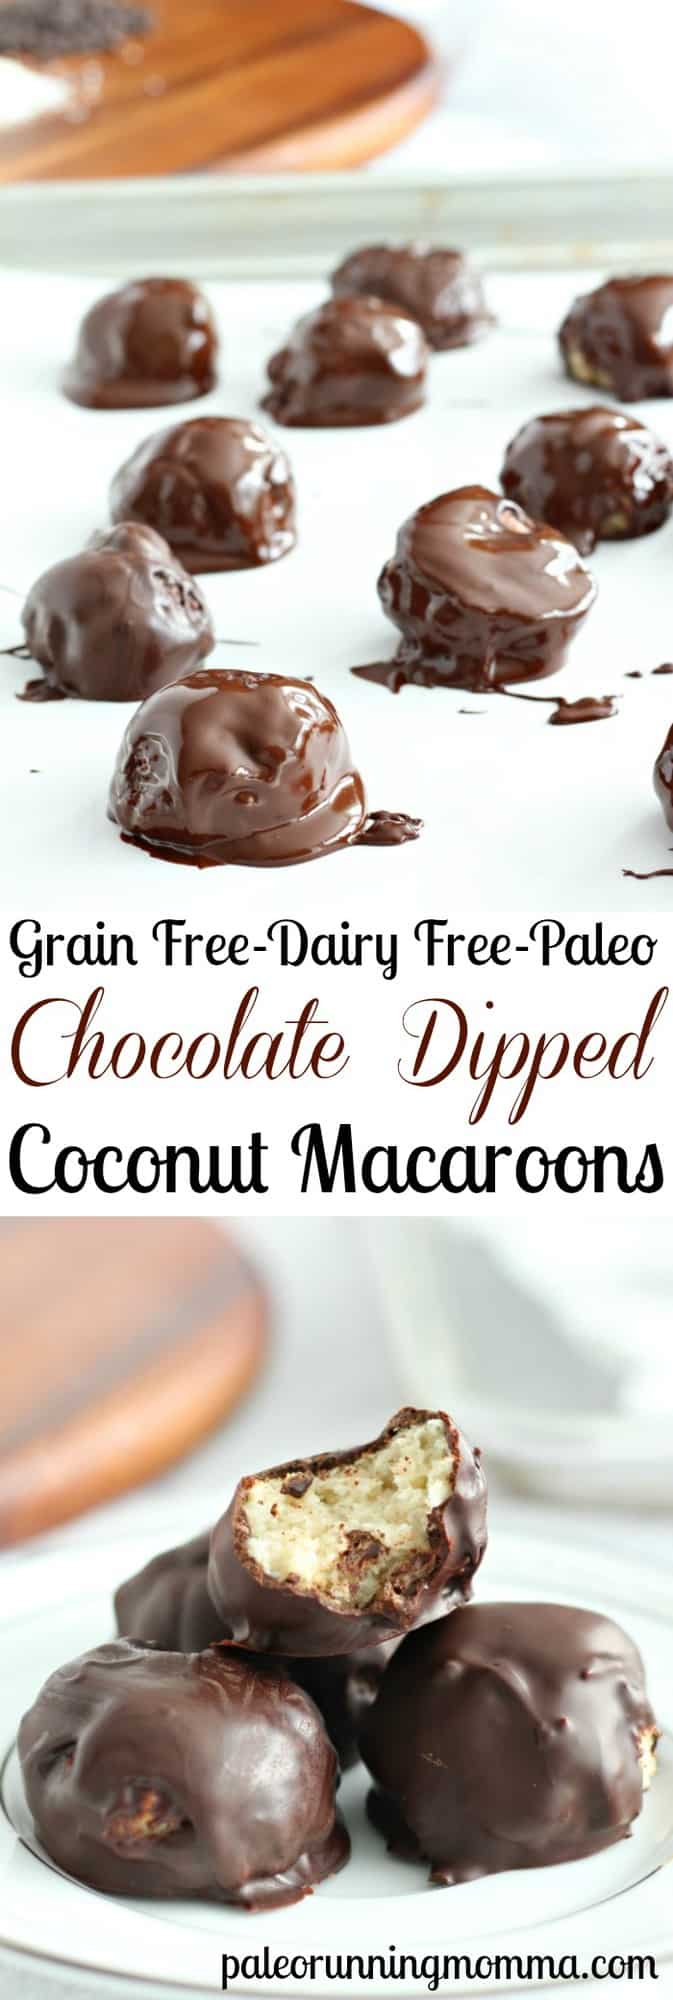 Easy Chocolate Dipped Coconut Macaroons that are grain free, dairy free, paleo, and so insanely delicious you'll never believe they're healthy!